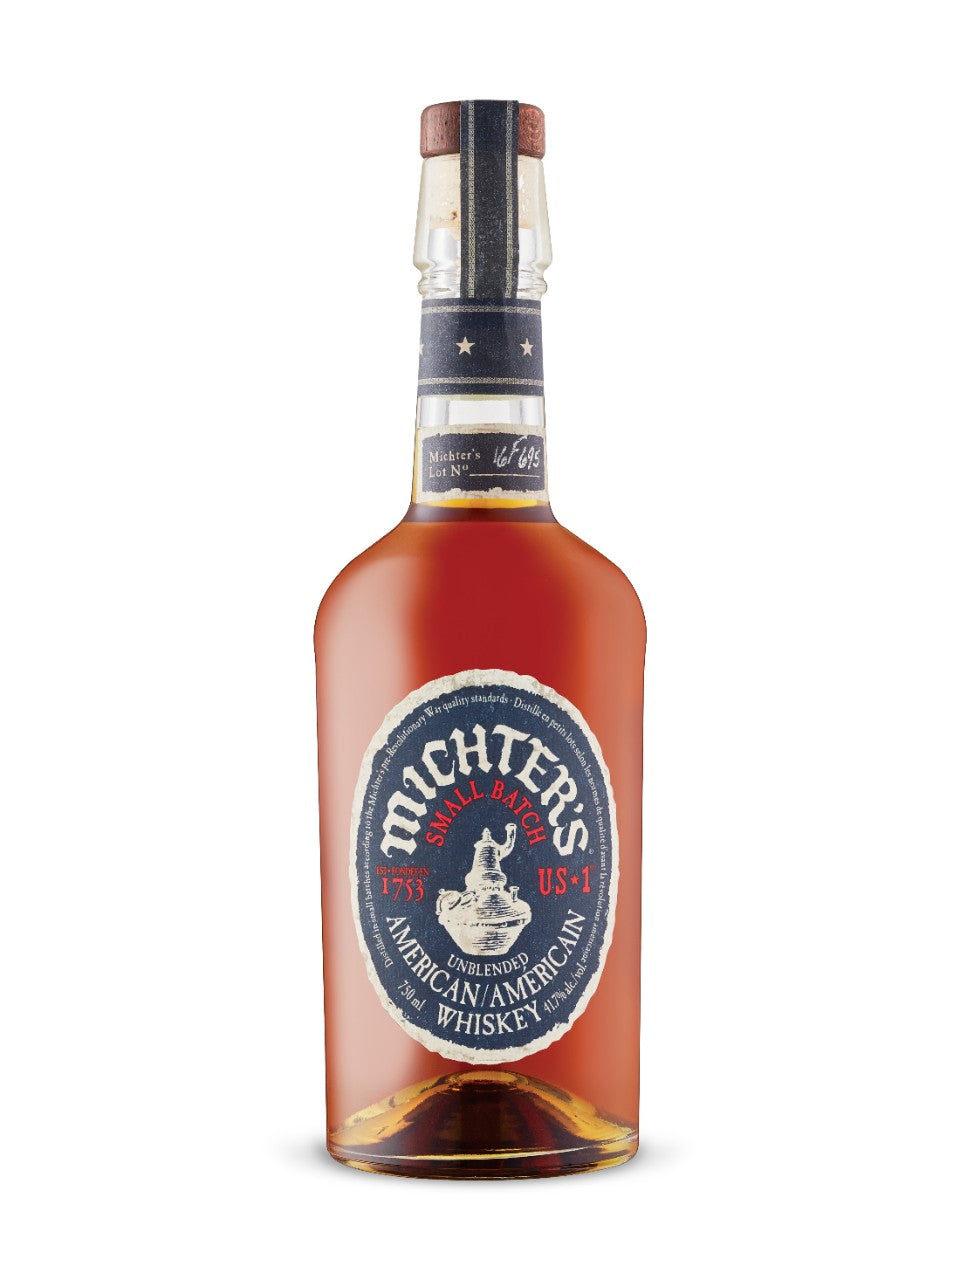 Michter's US-1 Small Batch Unblended American Whiskey 750 mL bottle